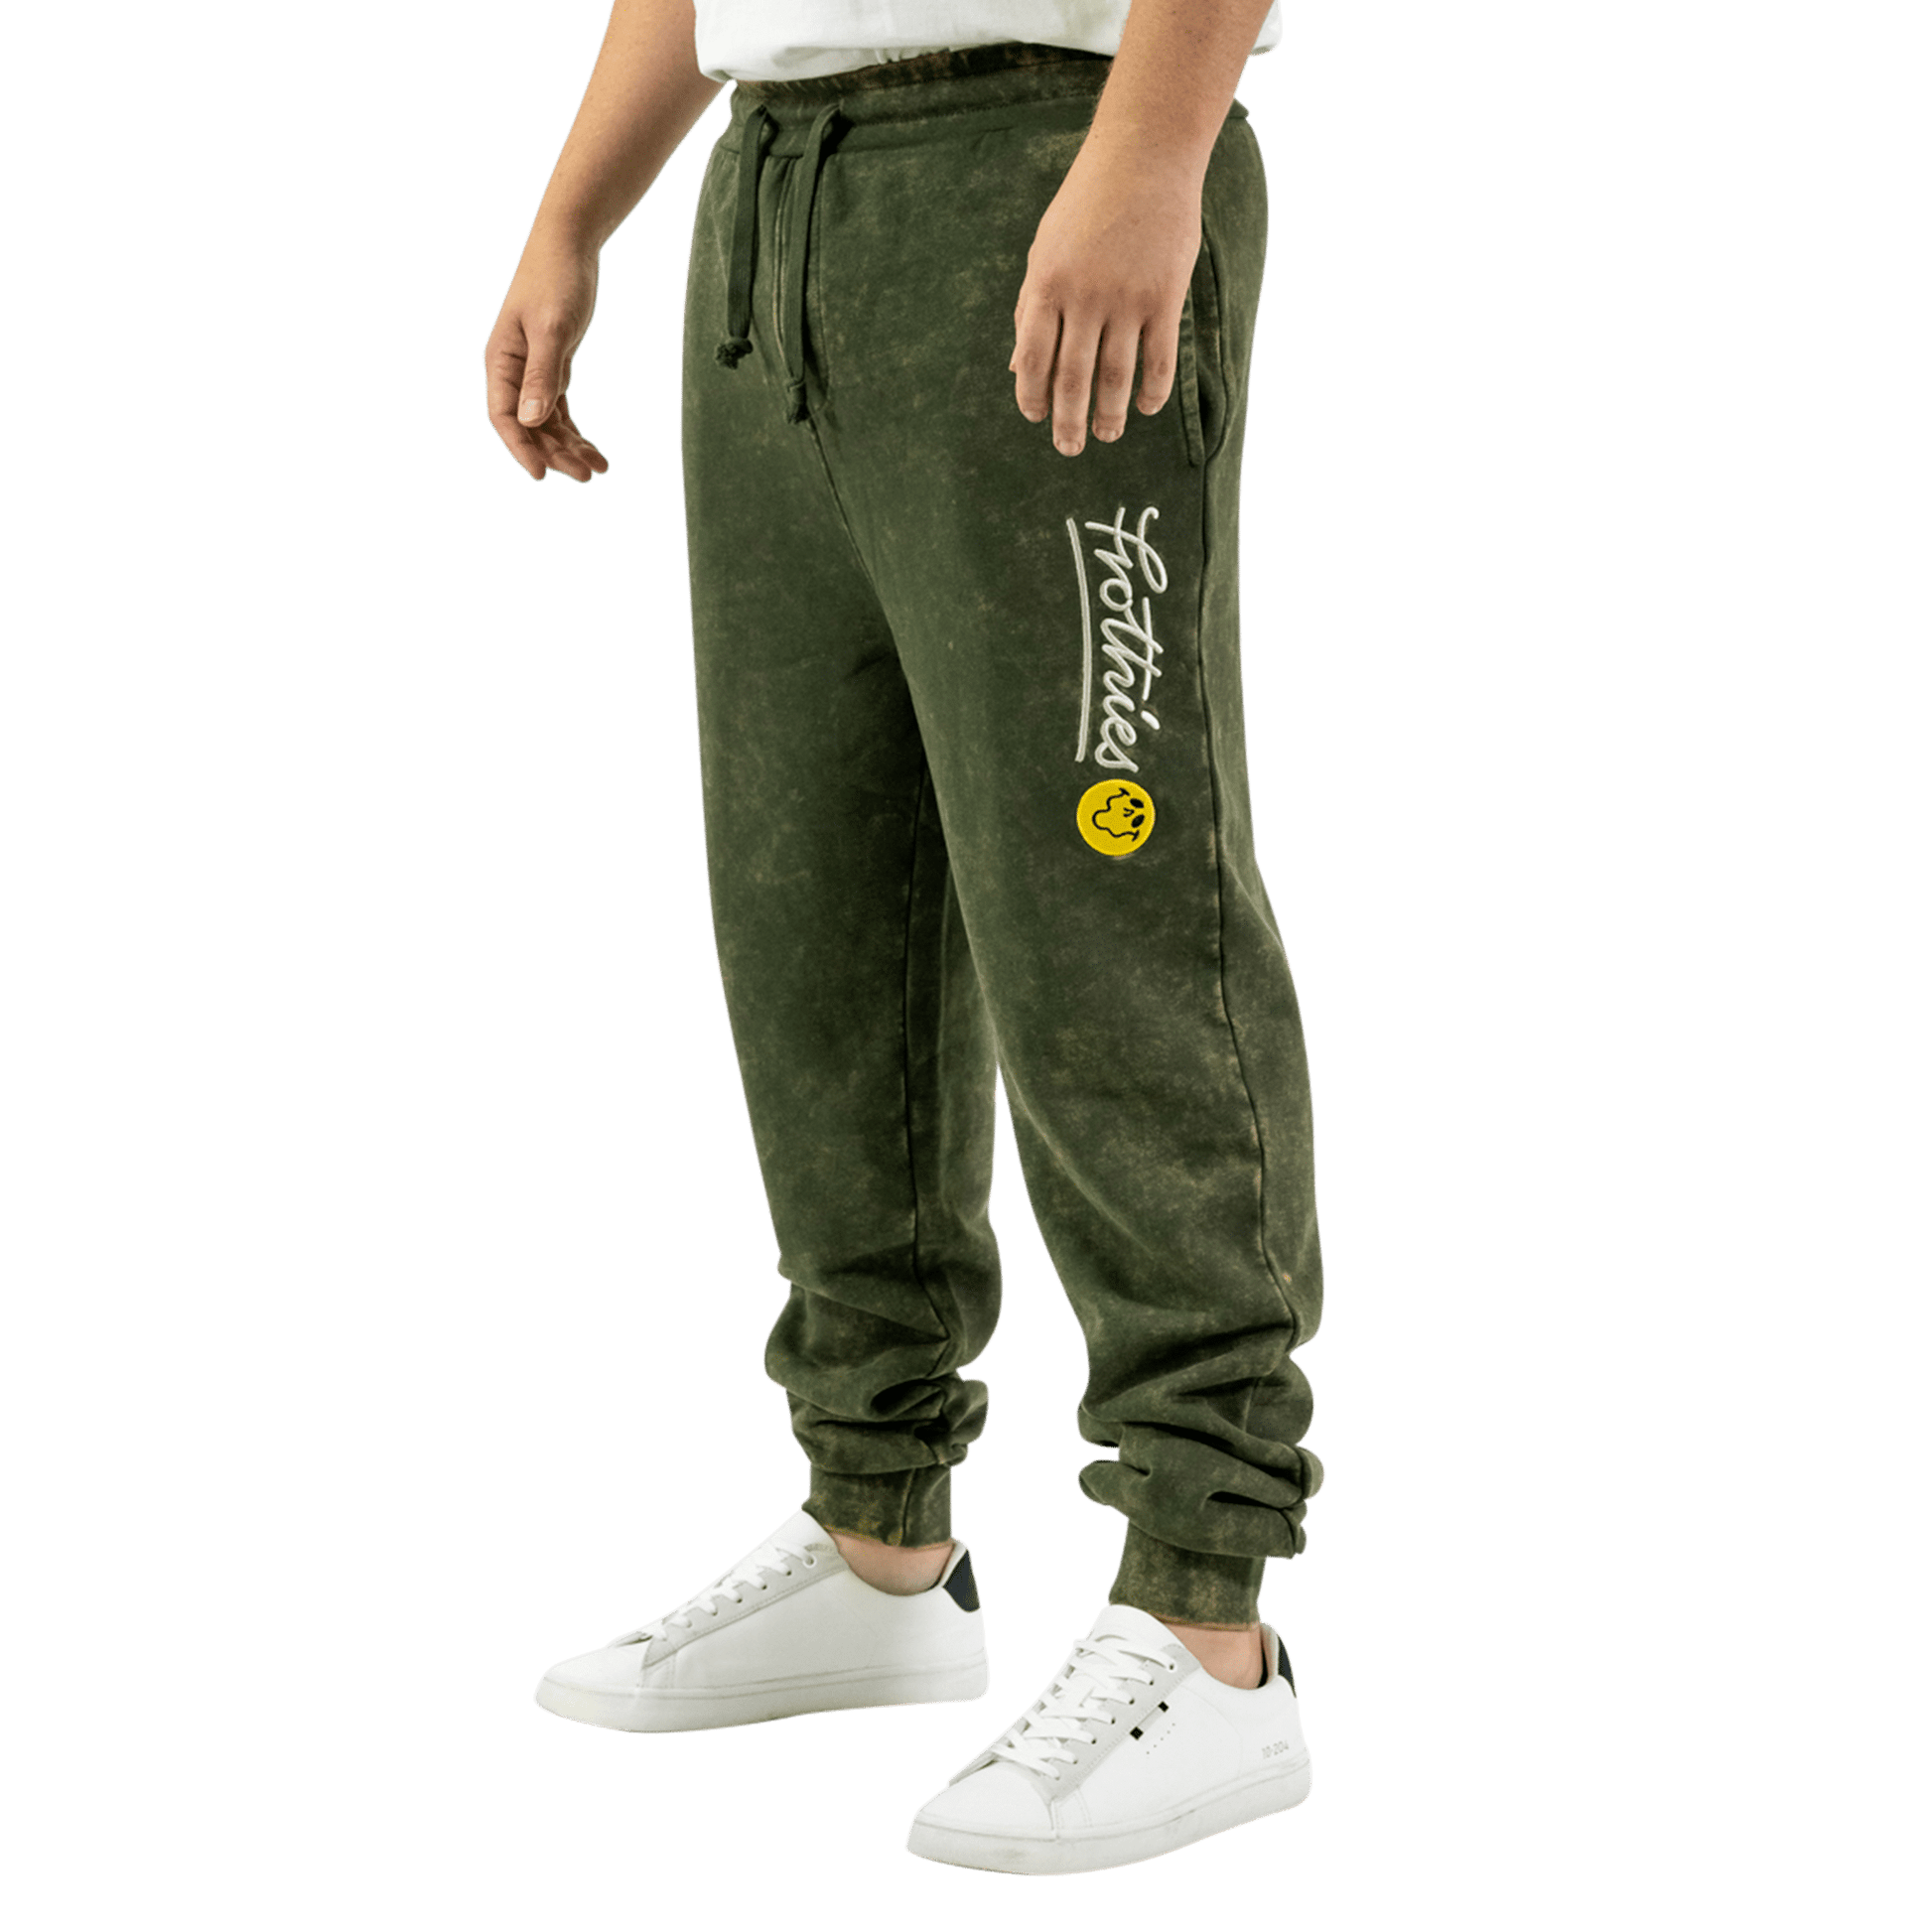 Get Froffed 3 Fleece Trackies Pants Frothies